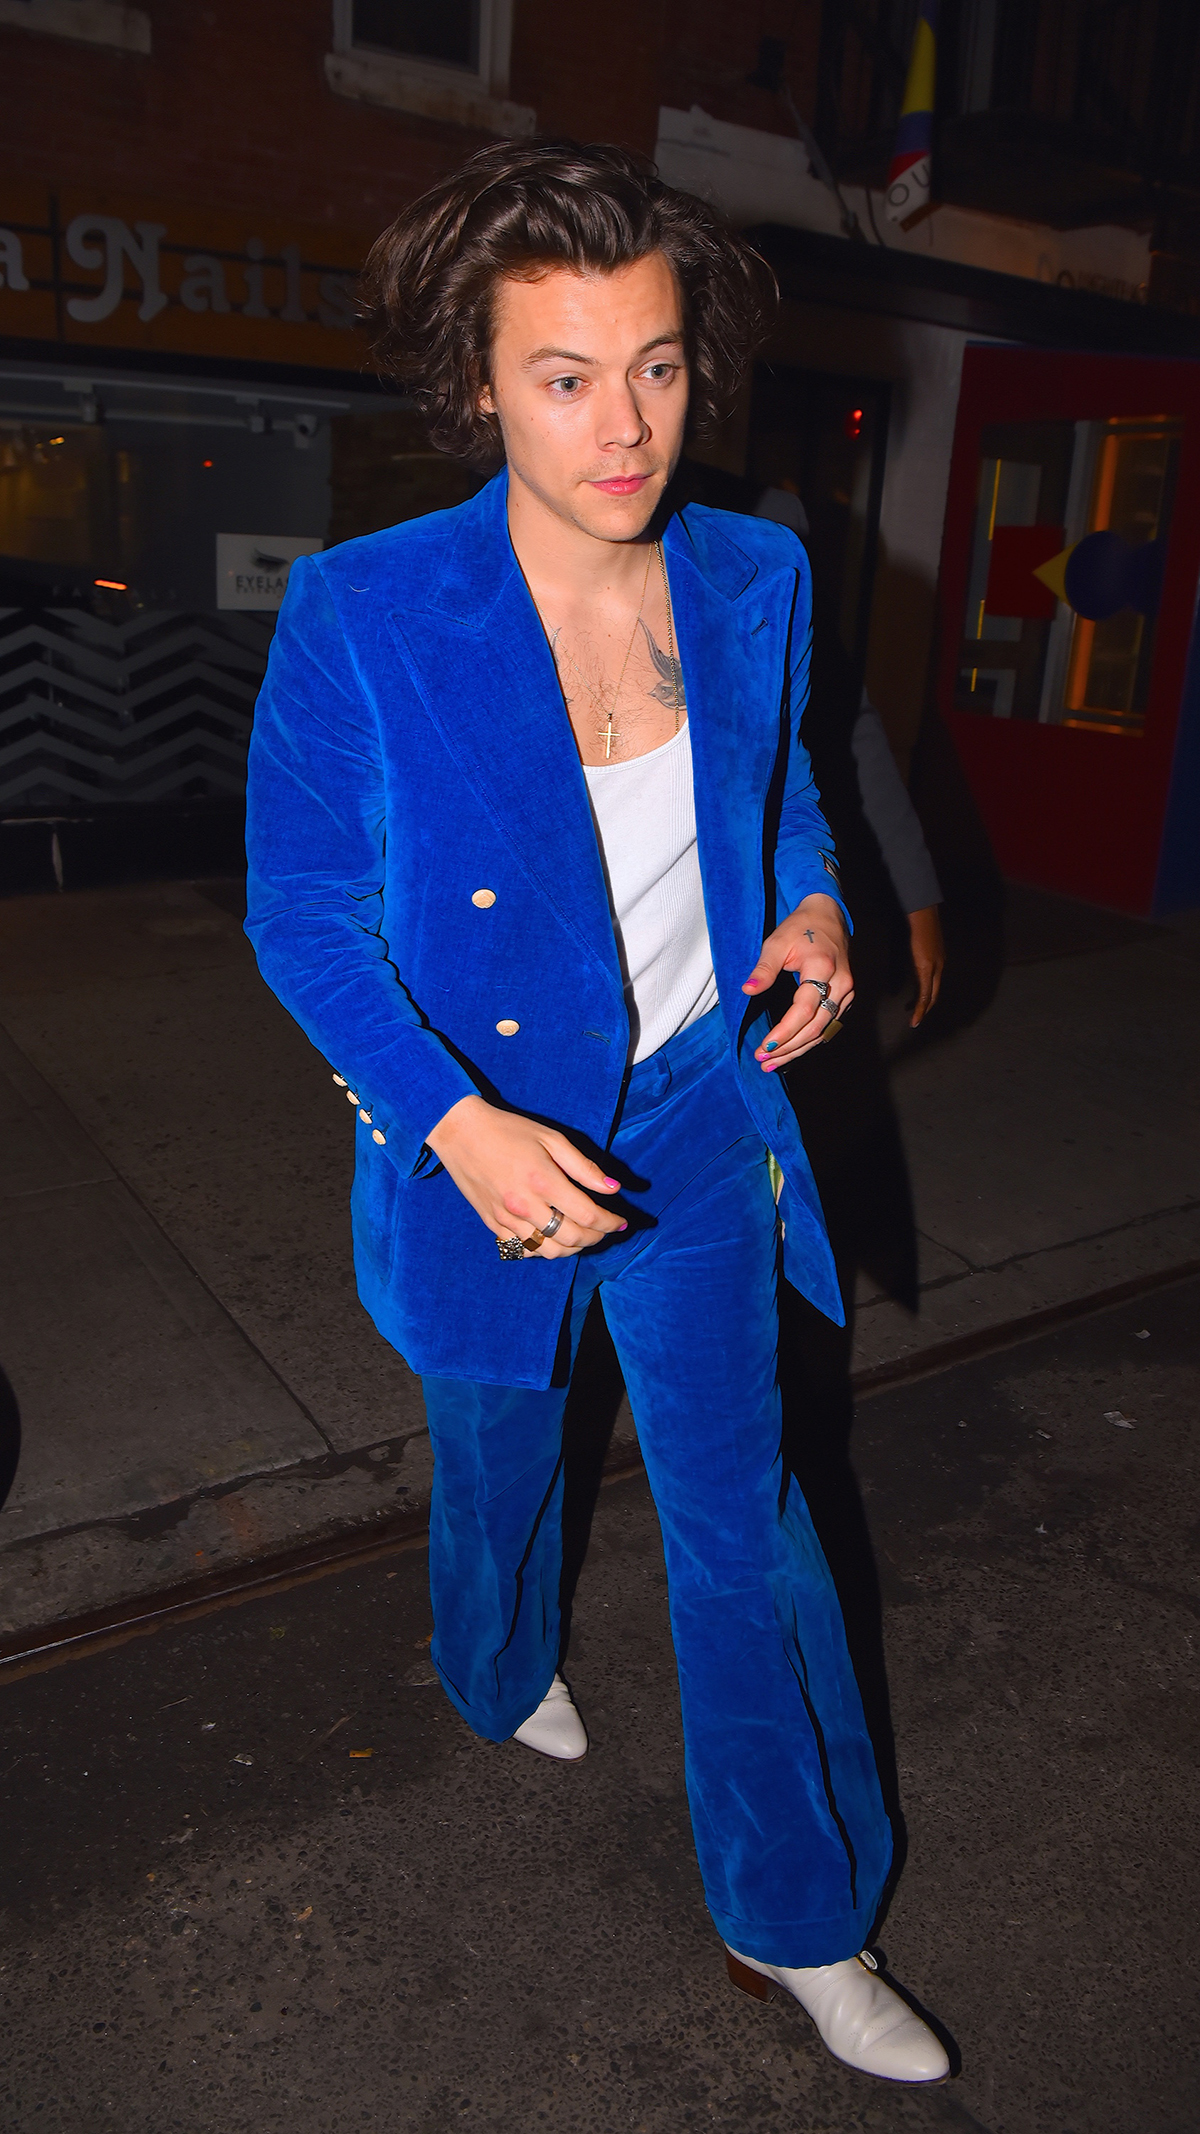 NEW YORK, NY - MARCH 29: Harry Styles seen out leaving Rubirosa restaurant in SoHo on March 29, 2019 in New York City. (Photo by Robert Kamau/GC Images)